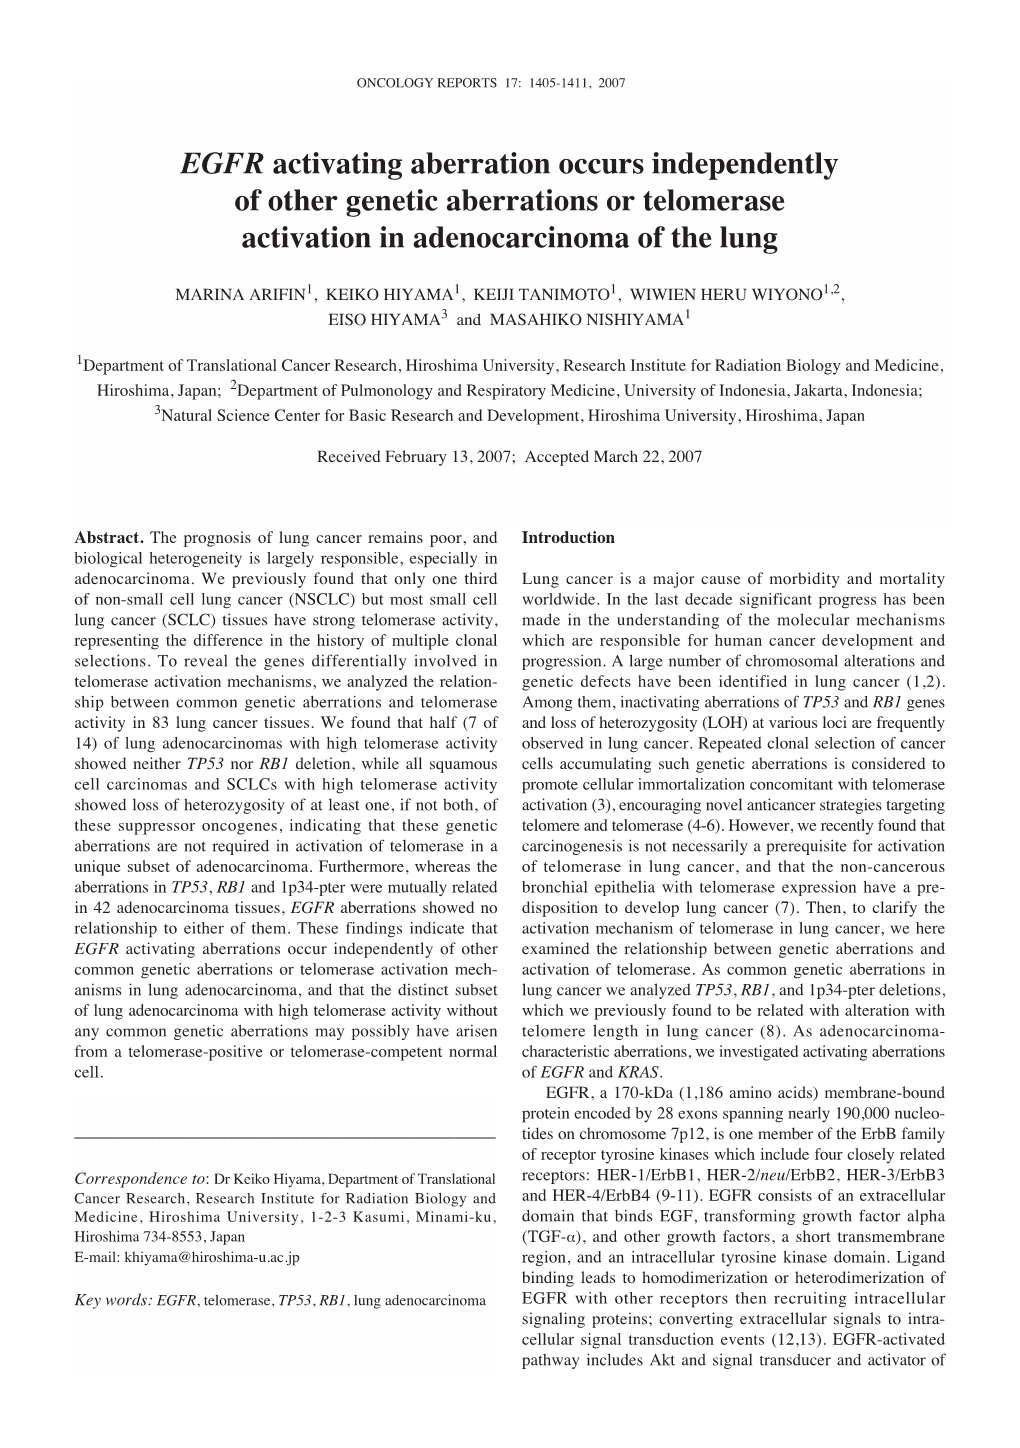 EGFR Activating Aberration Occurs Independently of Other Genetic Aberrations Or Telomerase Activation in Adenocarcinoma of the Lung